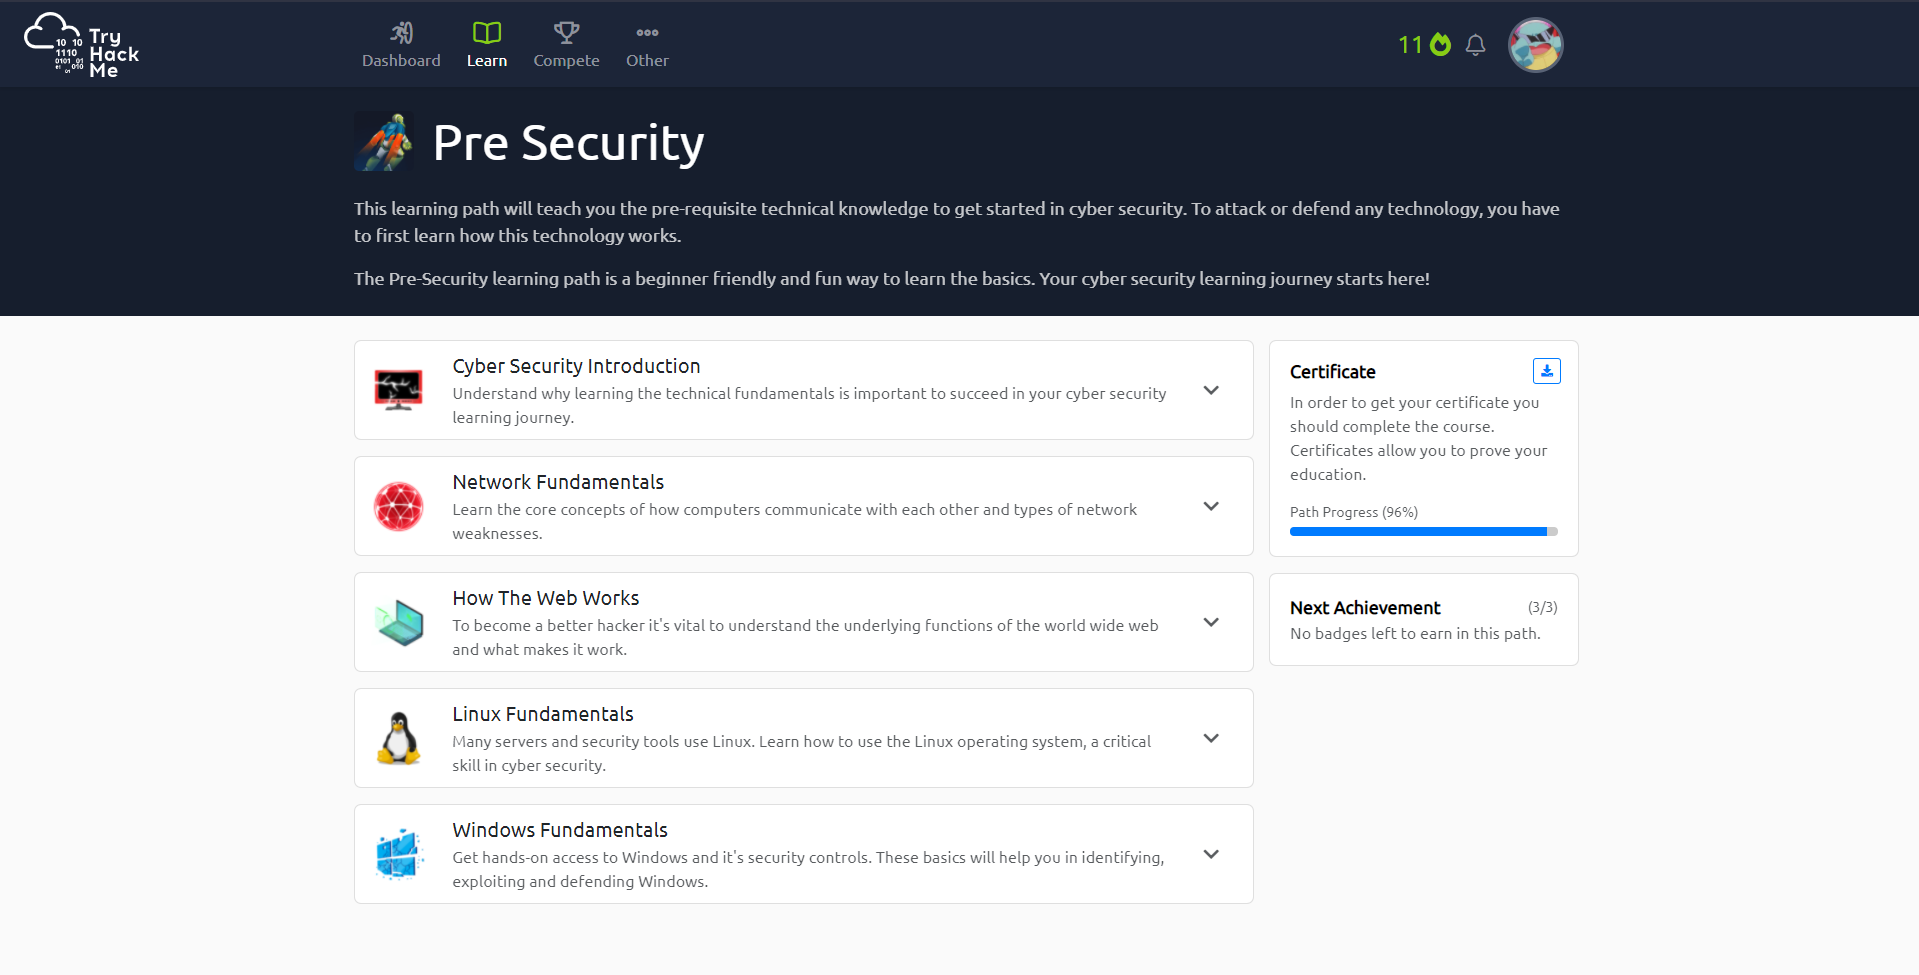 Pre-Security Learning Path overview